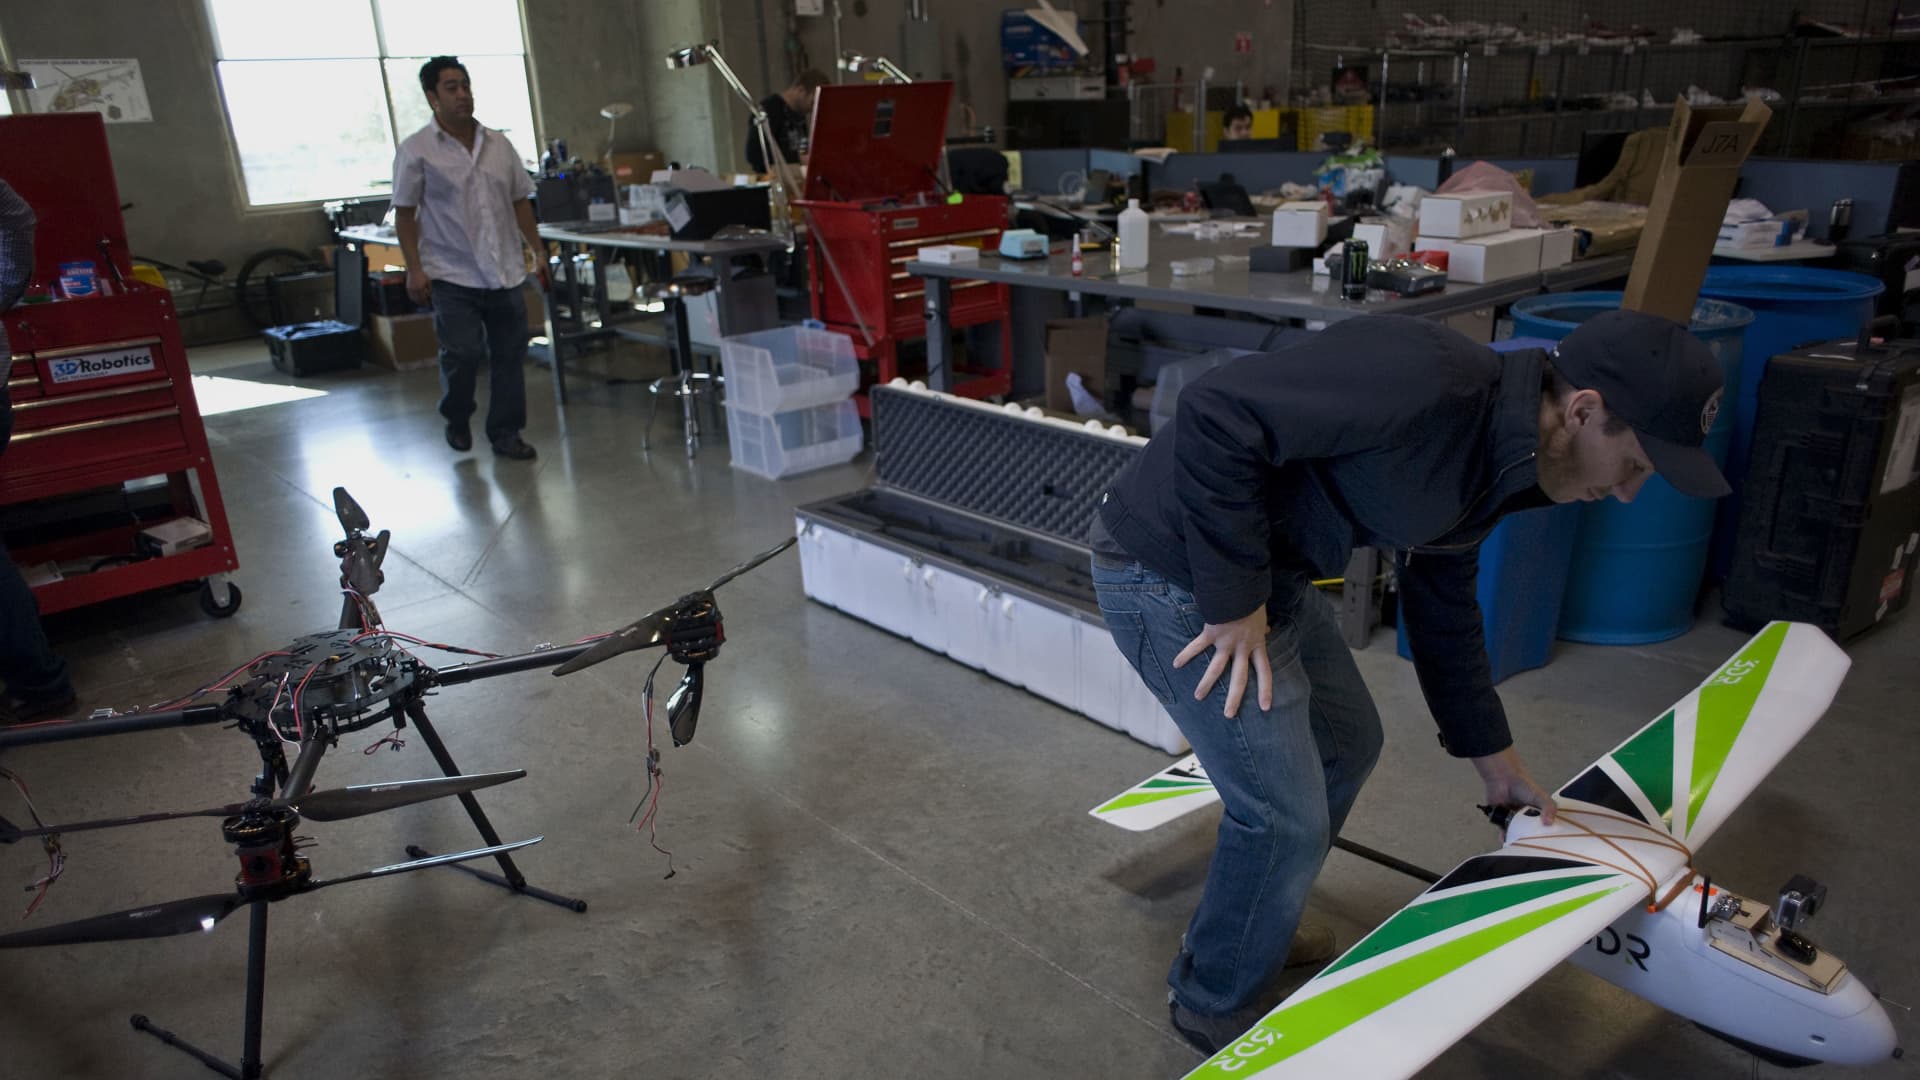 An employee moves a fixed wing unmanned aerial vehicle (UAV) at the 3D Robotics research and development facility in San Diego, California, U.S., on Monday, Jan. 5, 2015.